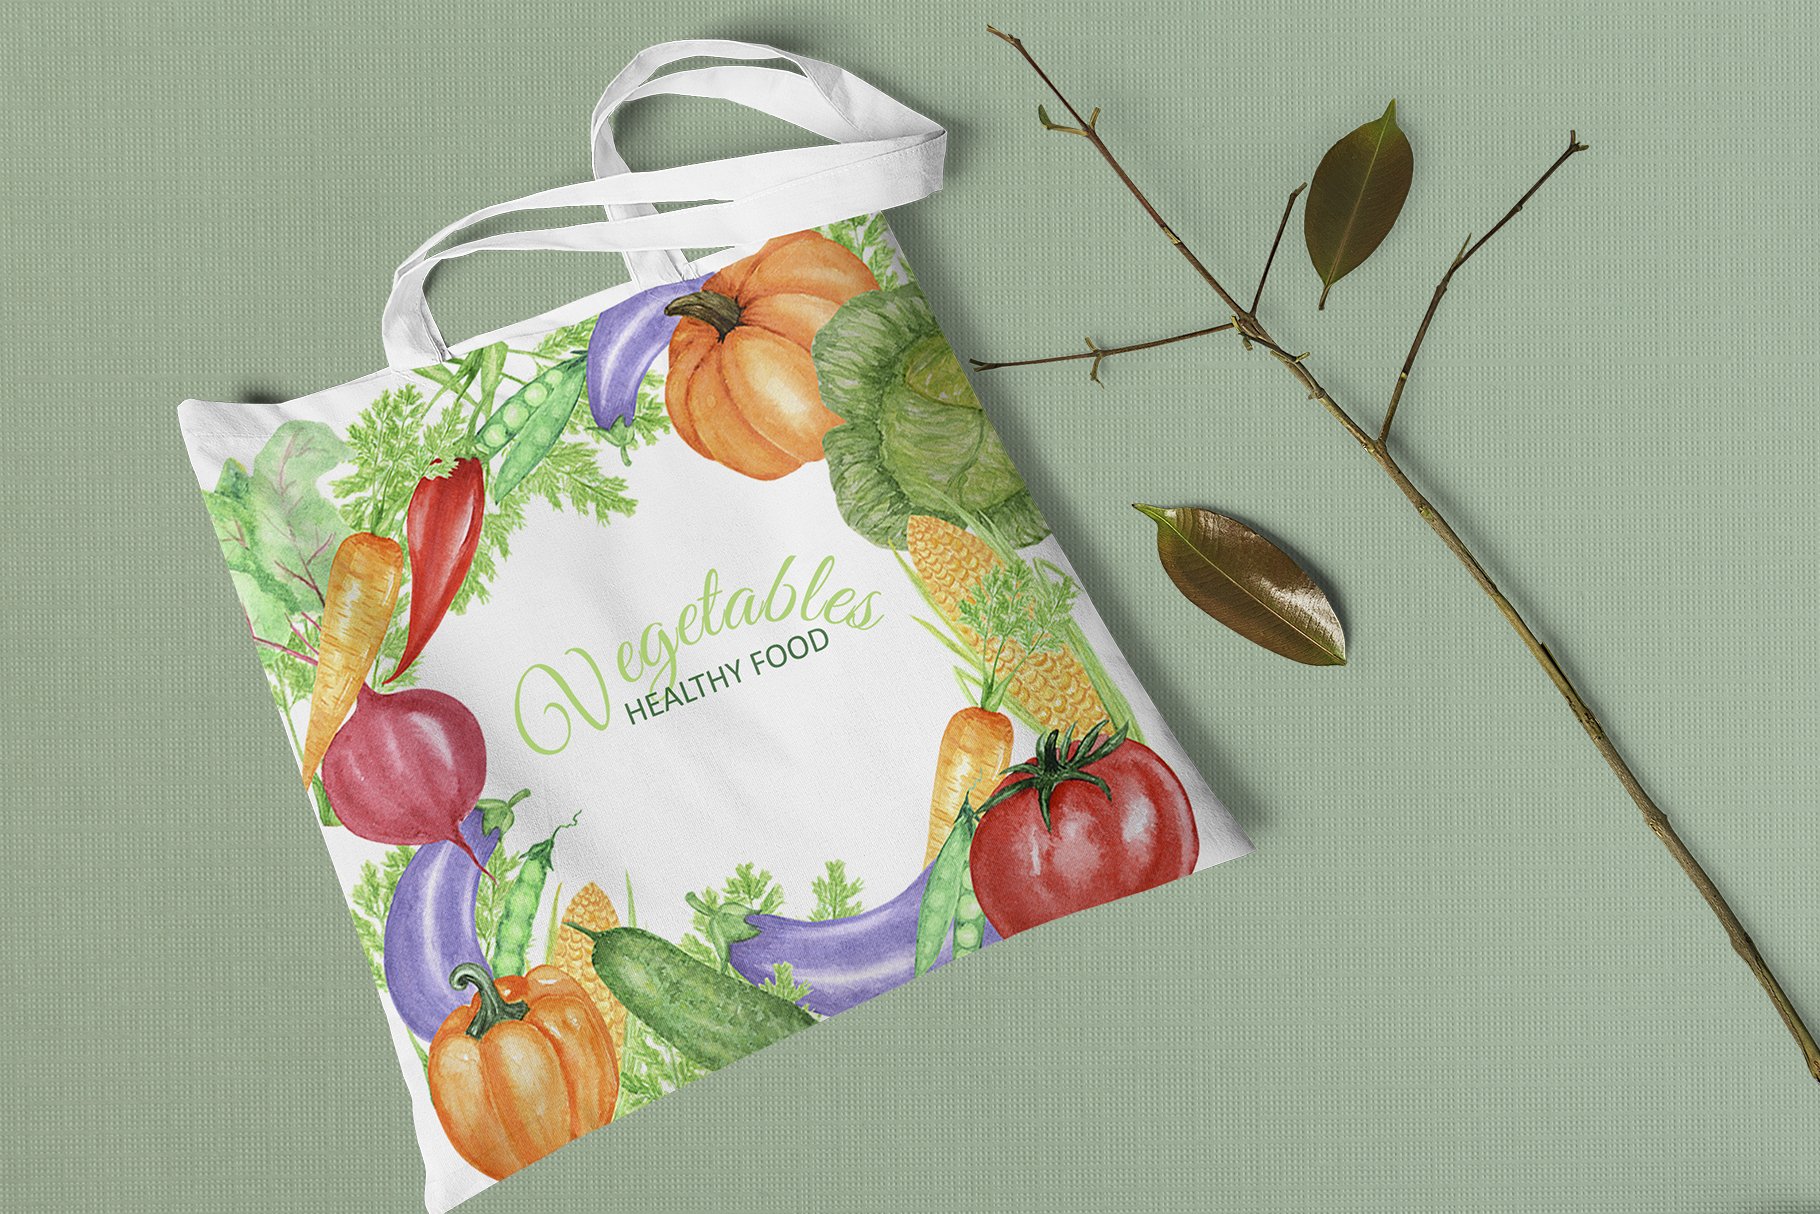 The bag has prints of various vegetables.